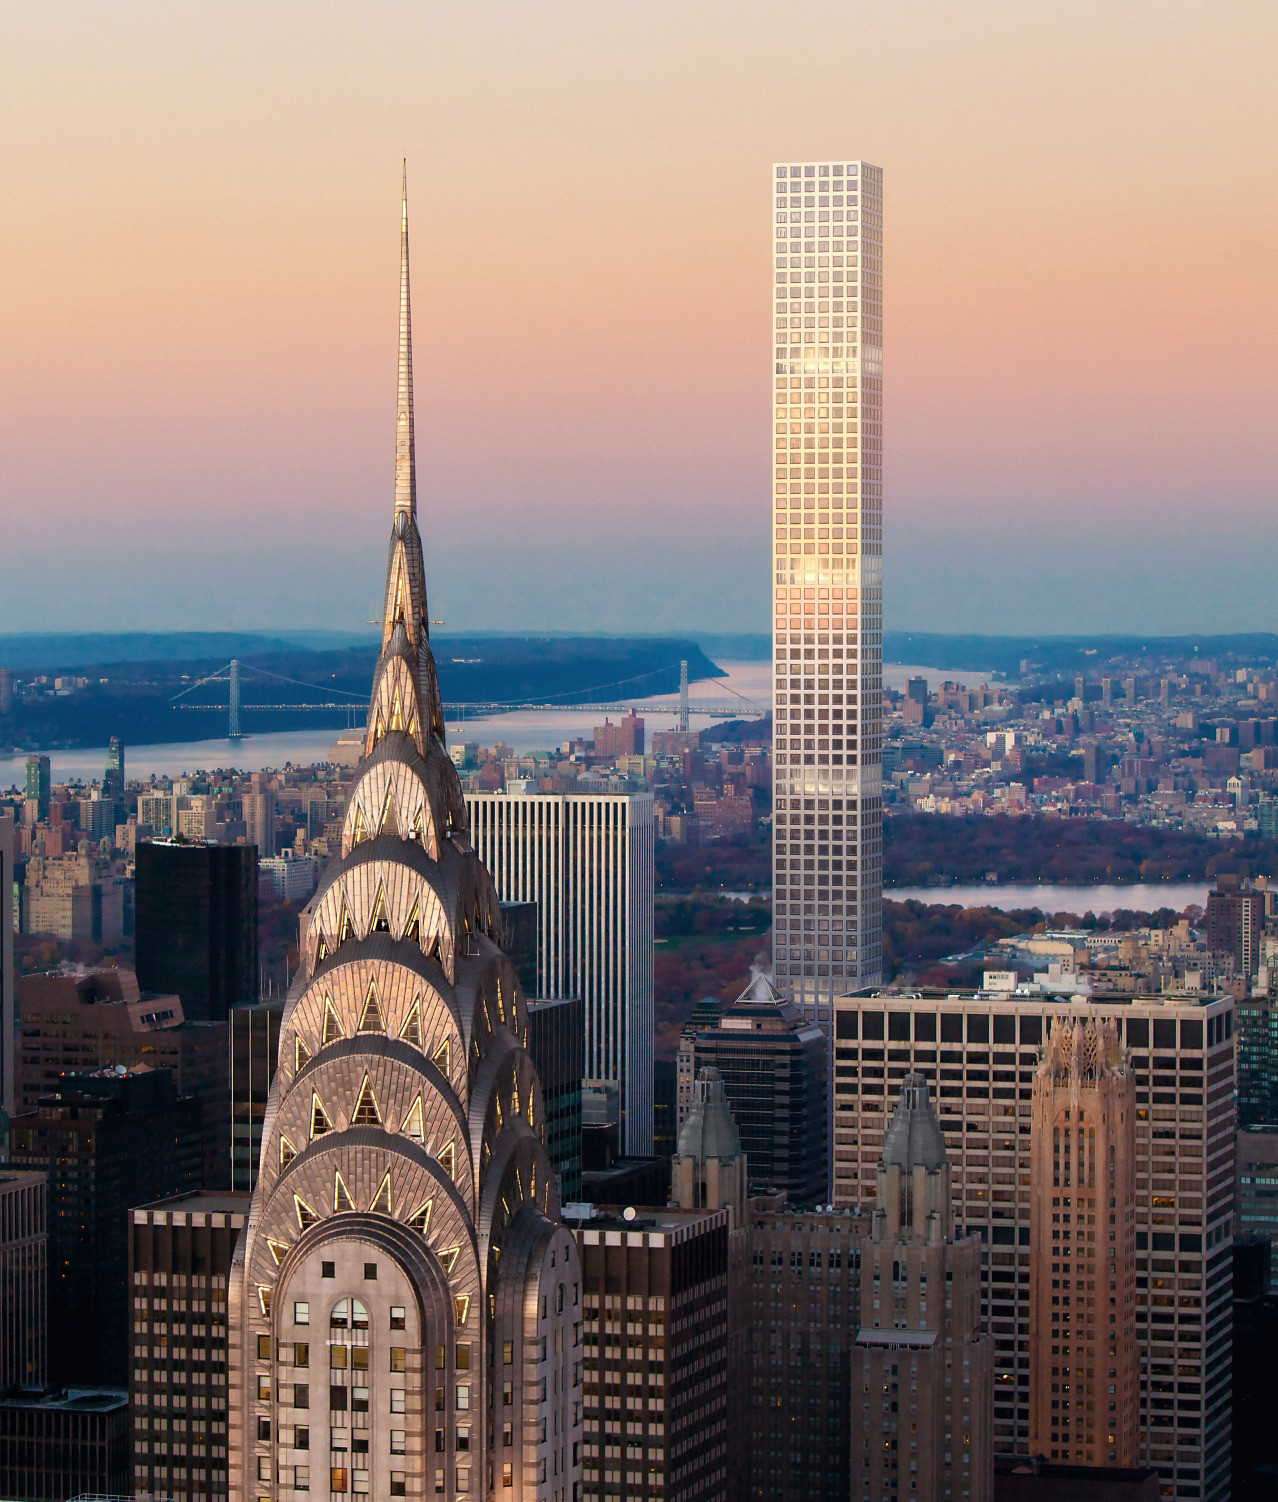 432 Park Avenue Records Its First Blockbuster Closing at $18.1M